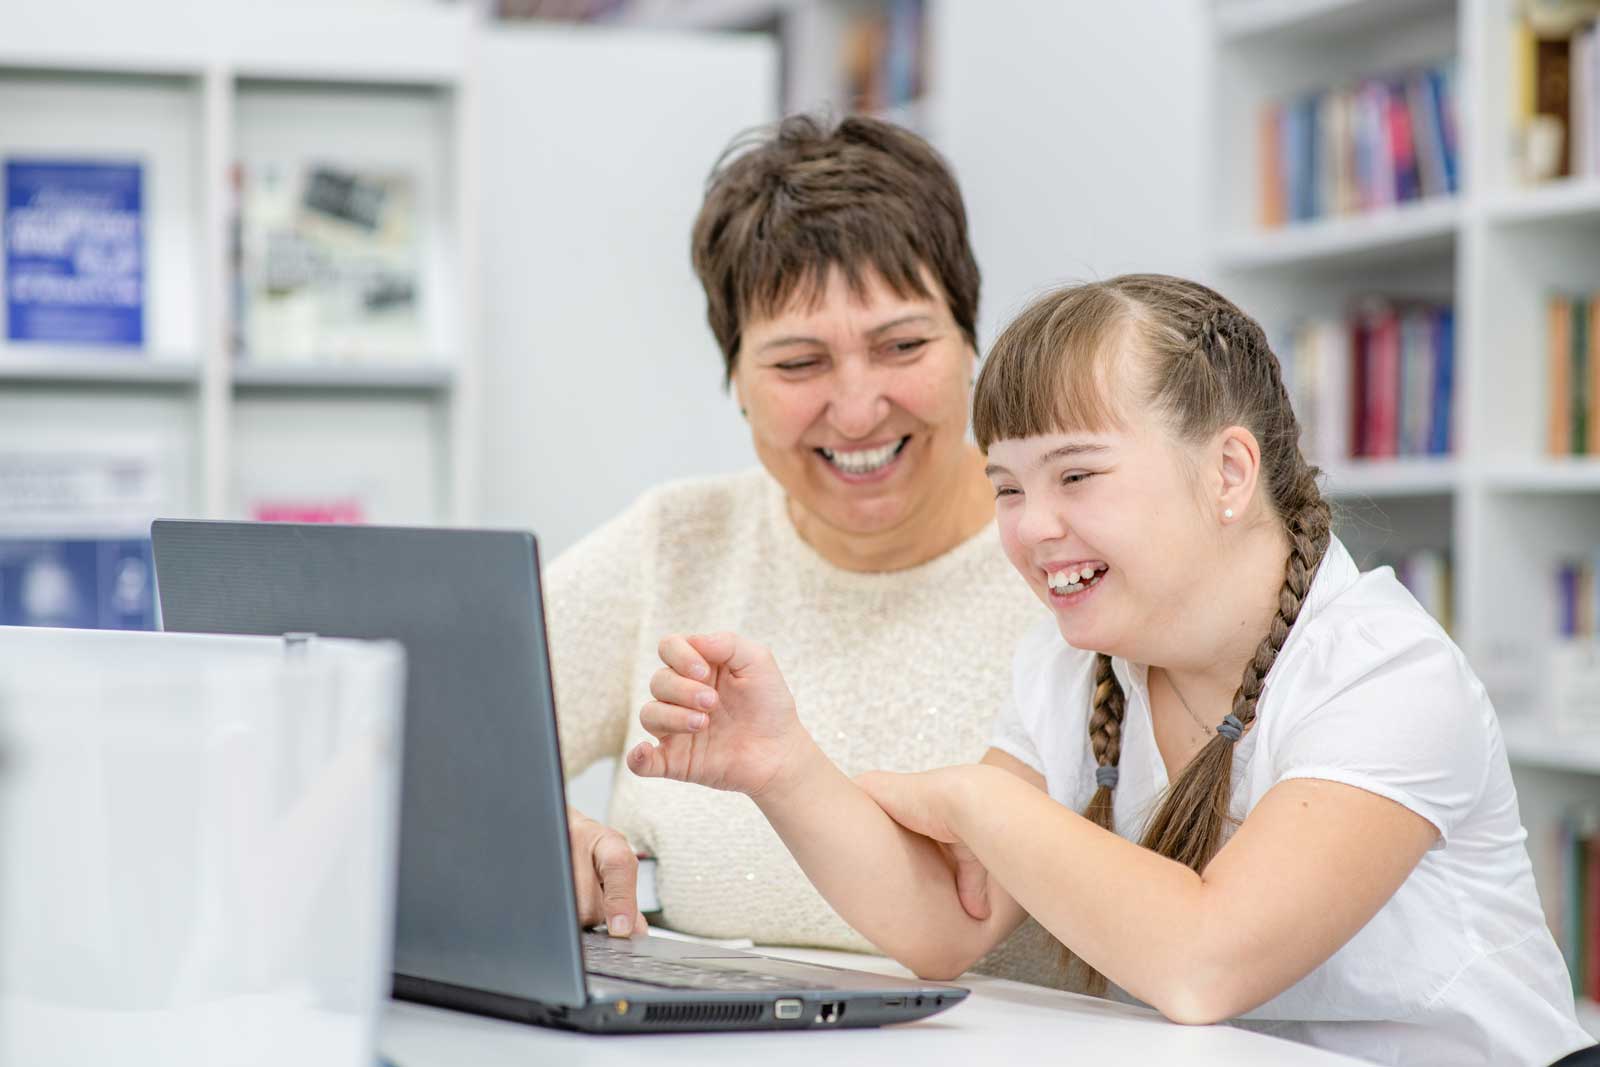 Smiling girl with down syndrome is uses a laptop with her teacher at library. Education for disabled children concept